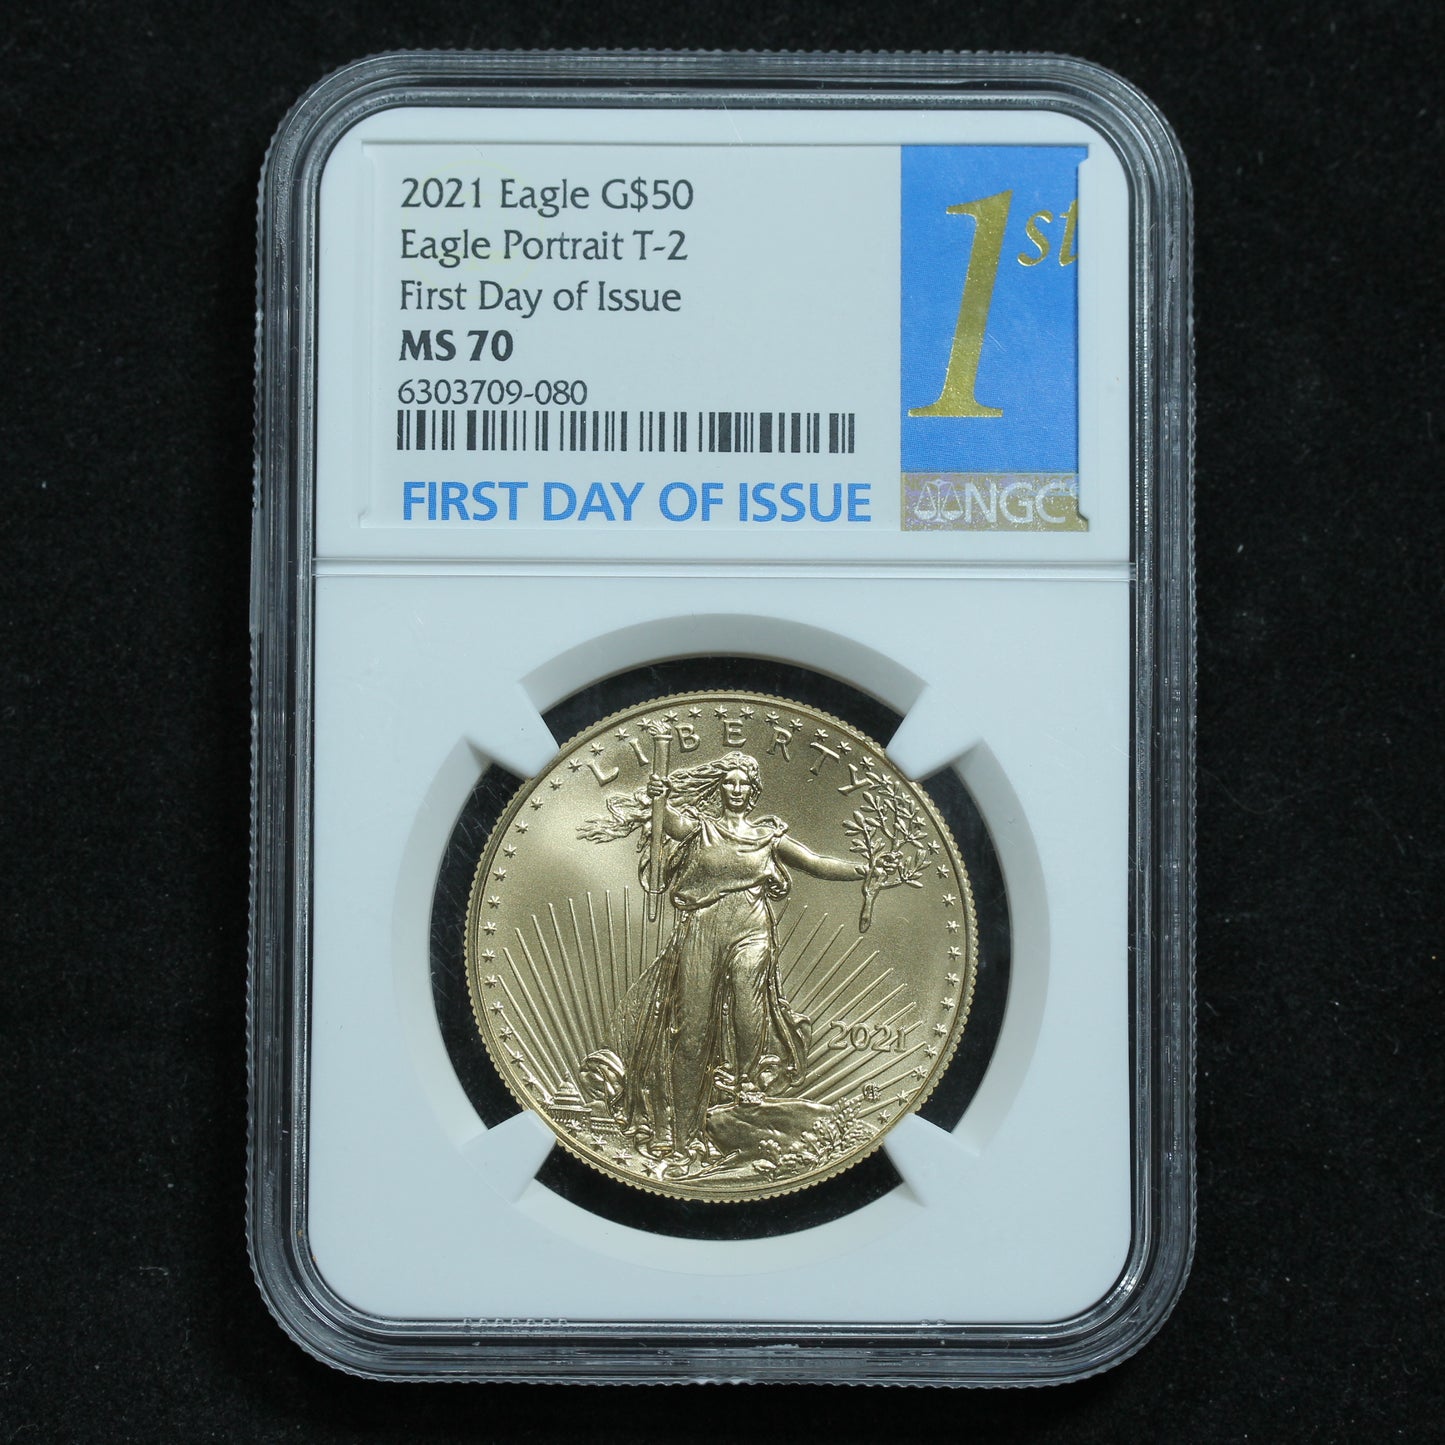 2021 1 oz Gold Eagle $50 Type 2 - NGC MS 70 First Day of Issue